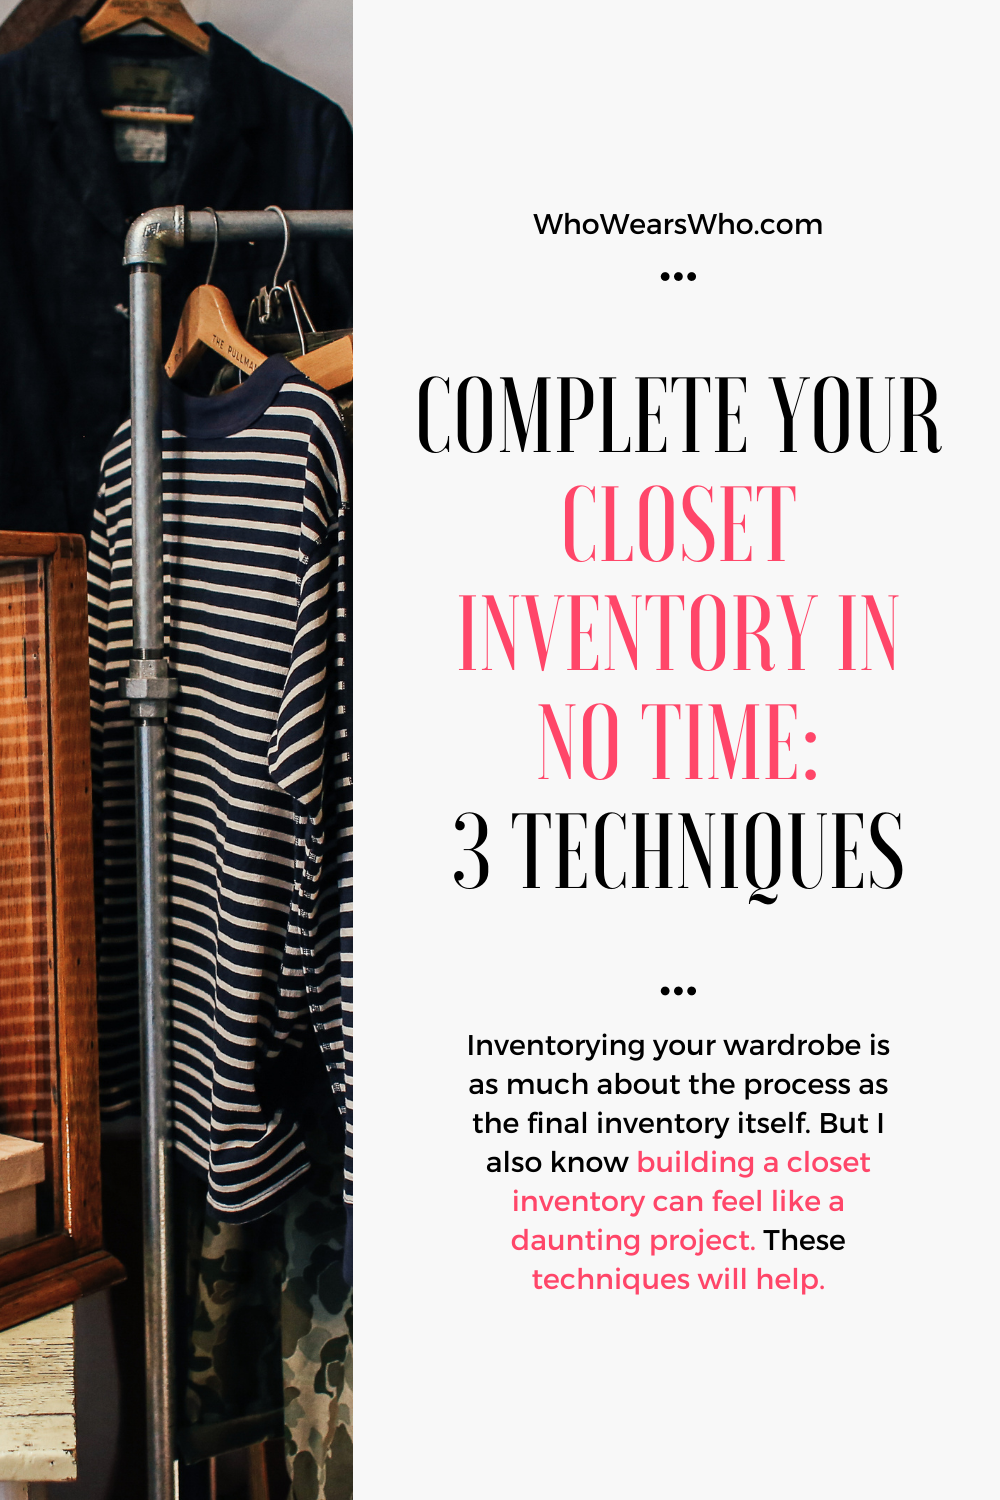 Complete your closet inventory in no time